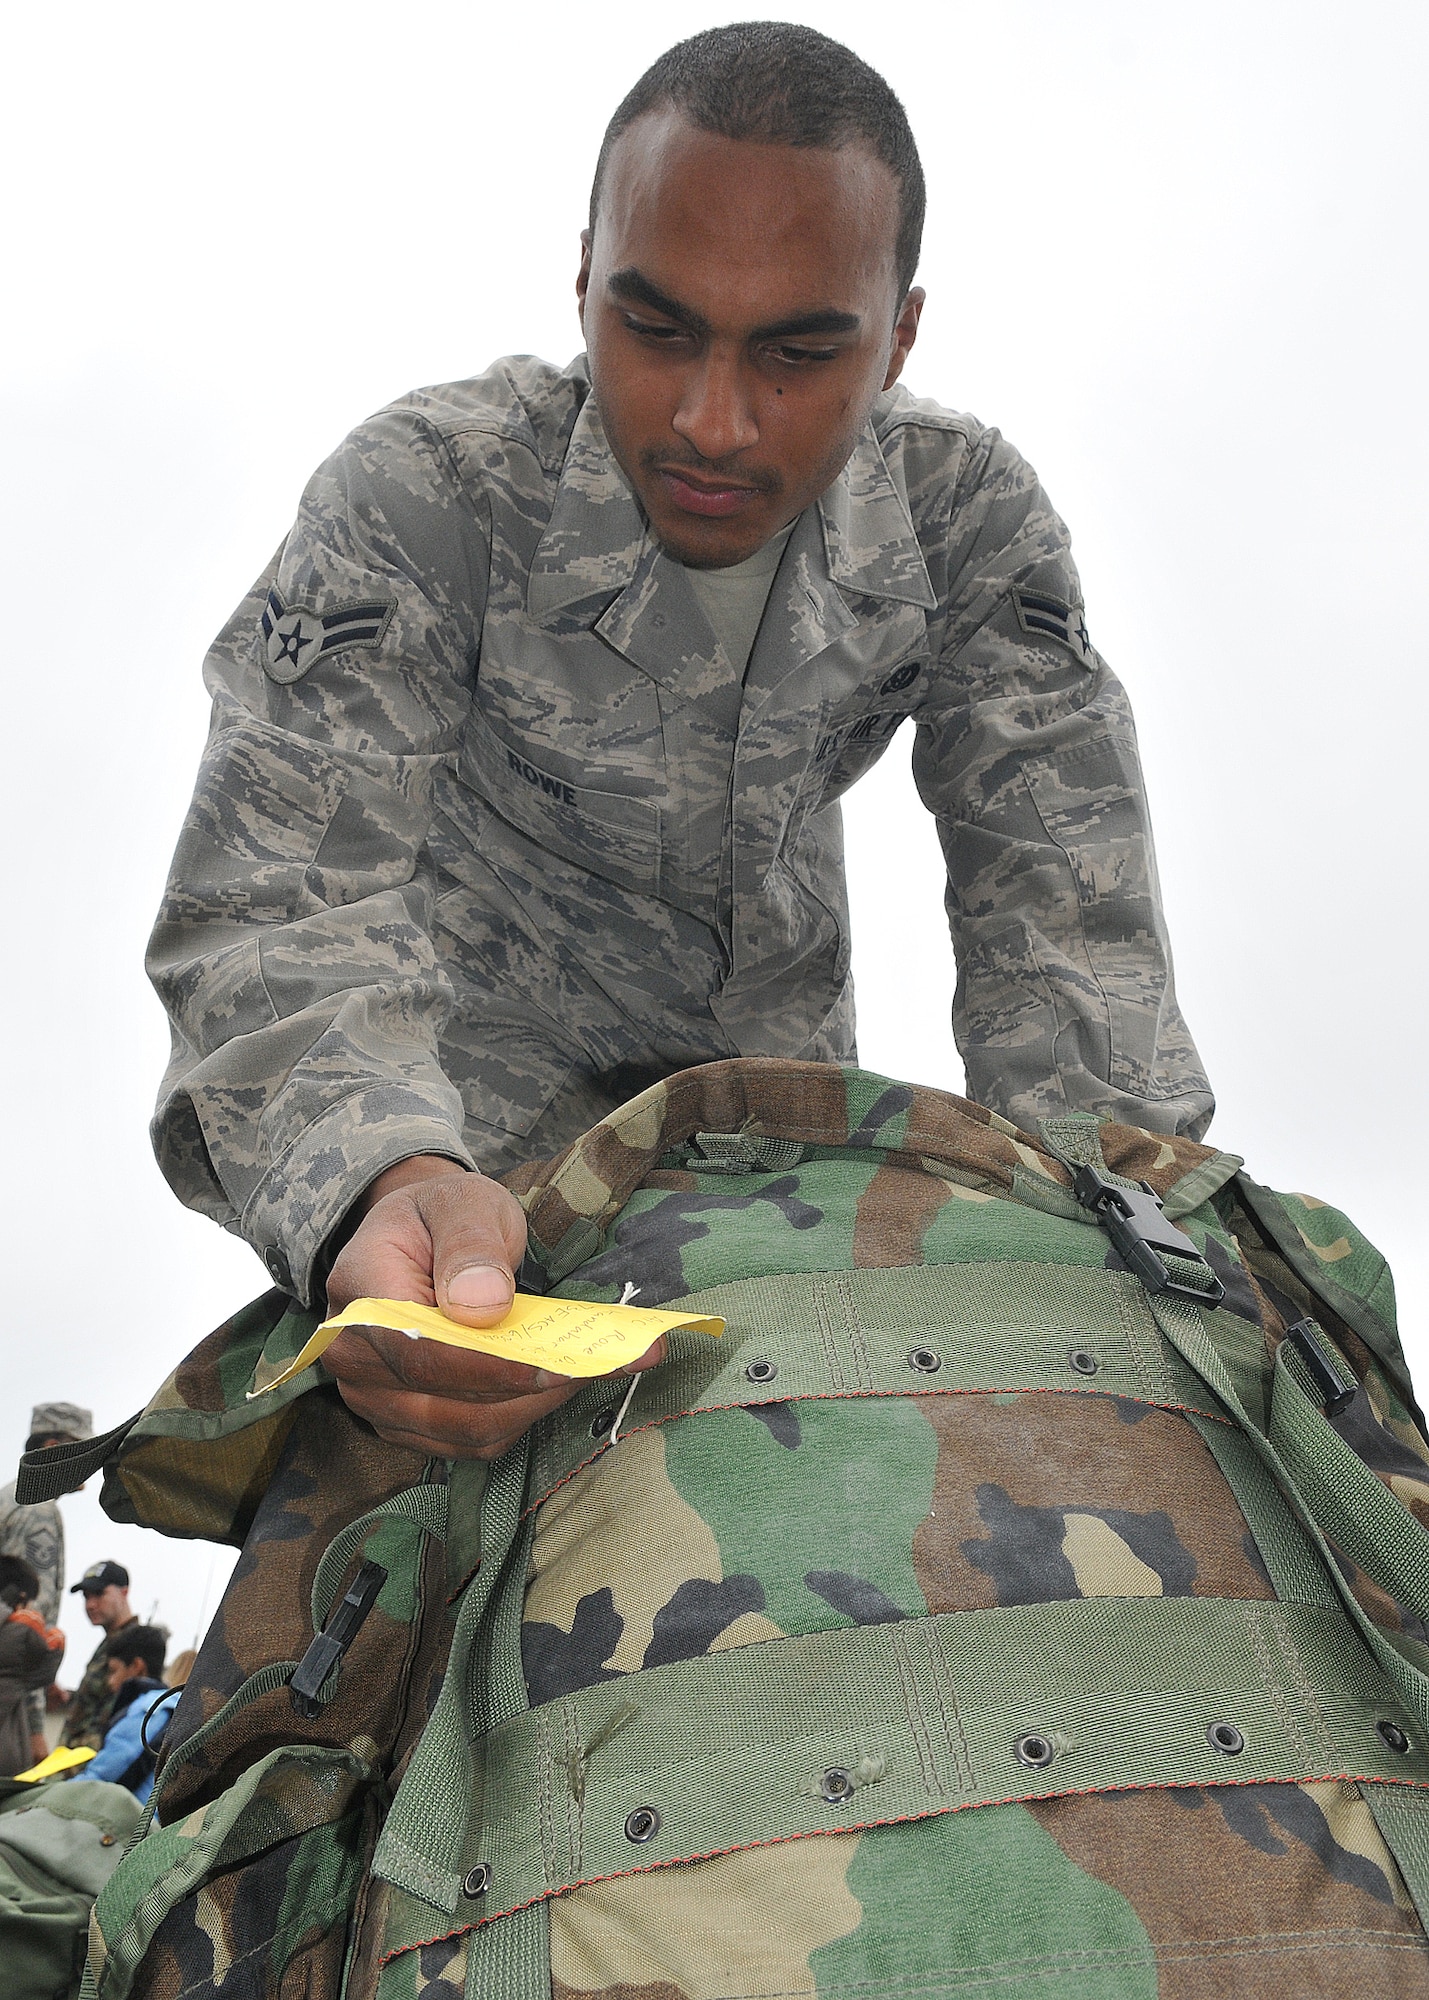 SPANGDAHELM AIR BASE, Germany – Airman 1st Class Desmond Rowe, checks baggage tags to find his rucksack after returning from a four-month deployment to Kandahar, Afghanistan, Sept. 16.  About 60 members of the 606th ACS operated radar and communication for command and control for the 71st Expeditionary Air Control Squadron.  The unit also deployed 300 short tons of equipment to support air battle management operations and more than 13,000 sorties.  Approximately 30 other 606th ACS members also returned from a four-month deployment to southwest Asia in support of the 73rd EACS.  (U.S. Air Force photo/Airman 1st Class Nick Wilson)